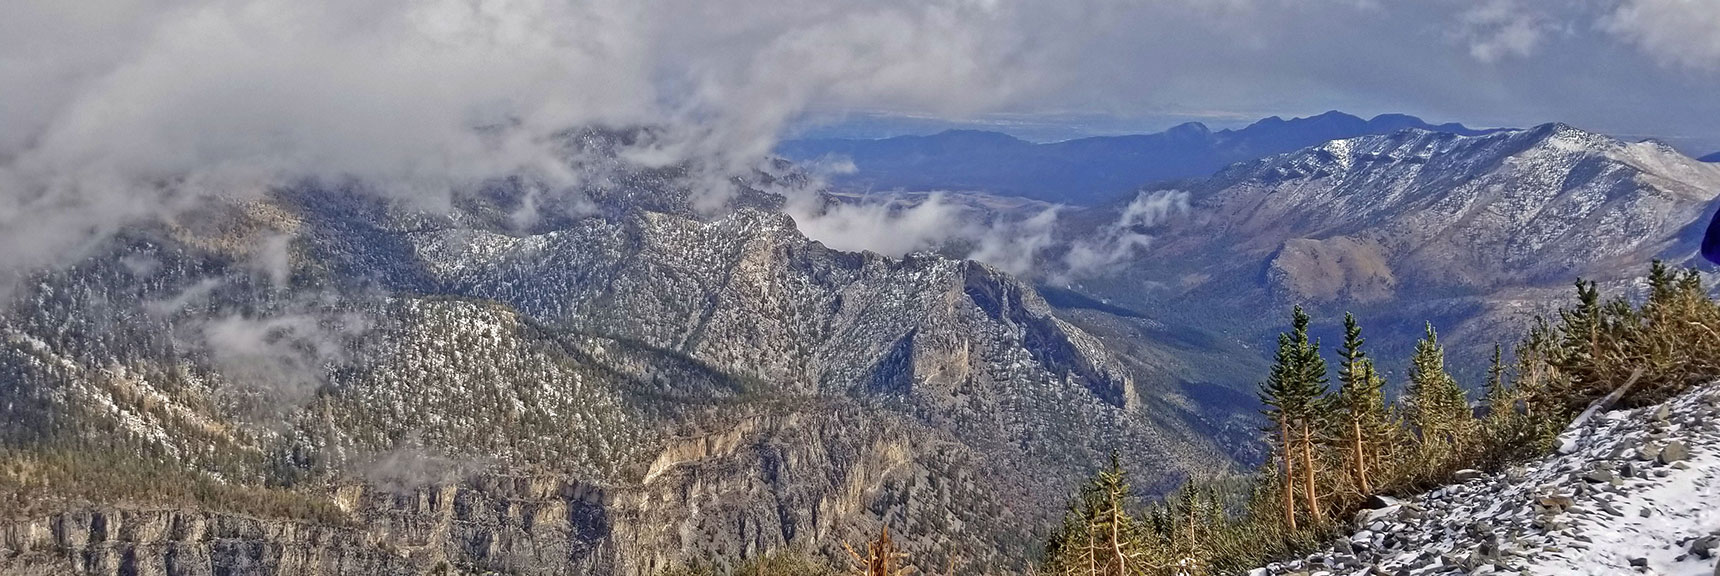 Kyle Canyon Coming Into View | Charleston Peak Loop October Snow Dusting | Mt. Charleston Wilderness | Spring Mountains, Nevada